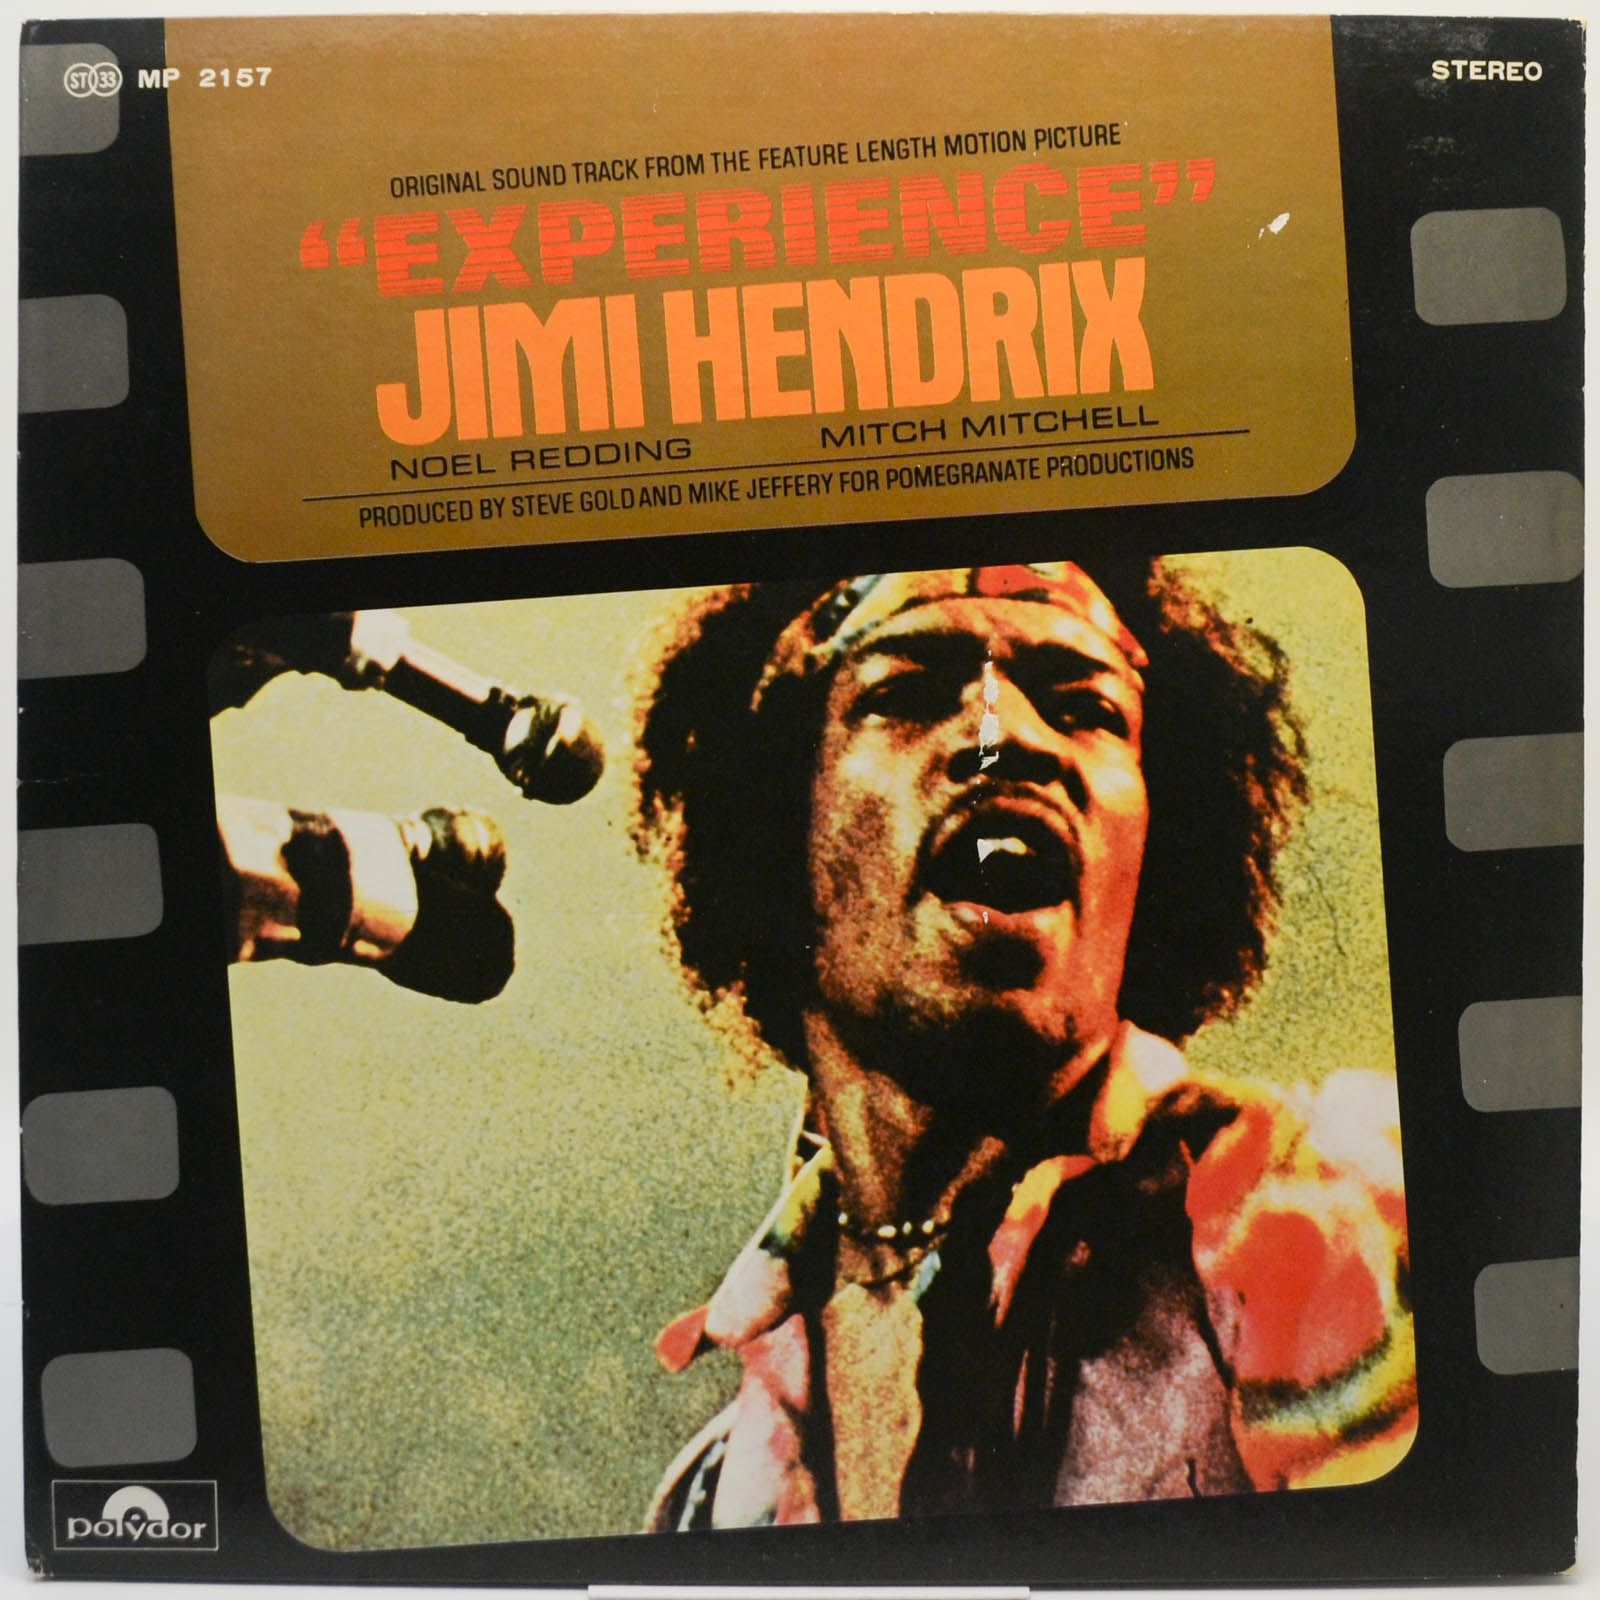 Jimi Hendrix — Original Sound Track Of The Motion Picture "Experience", 1971